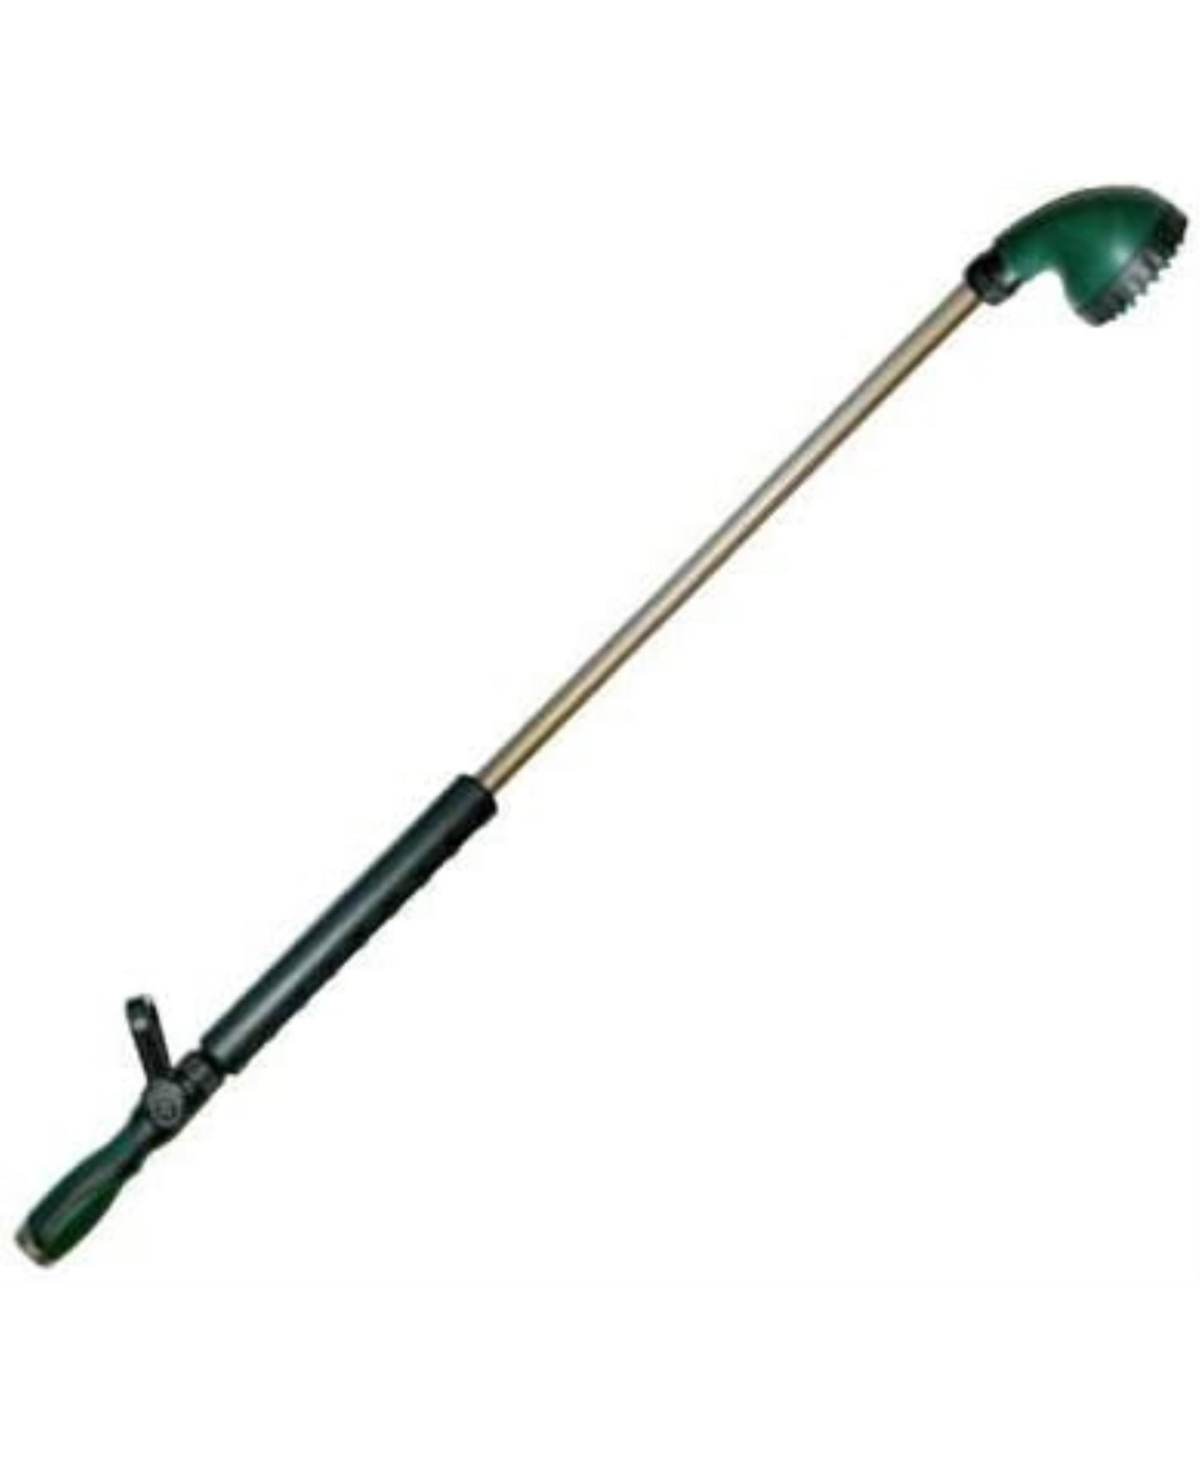 Shower Wand, For Watering Hard To Reach Plants, 33 inches - Green